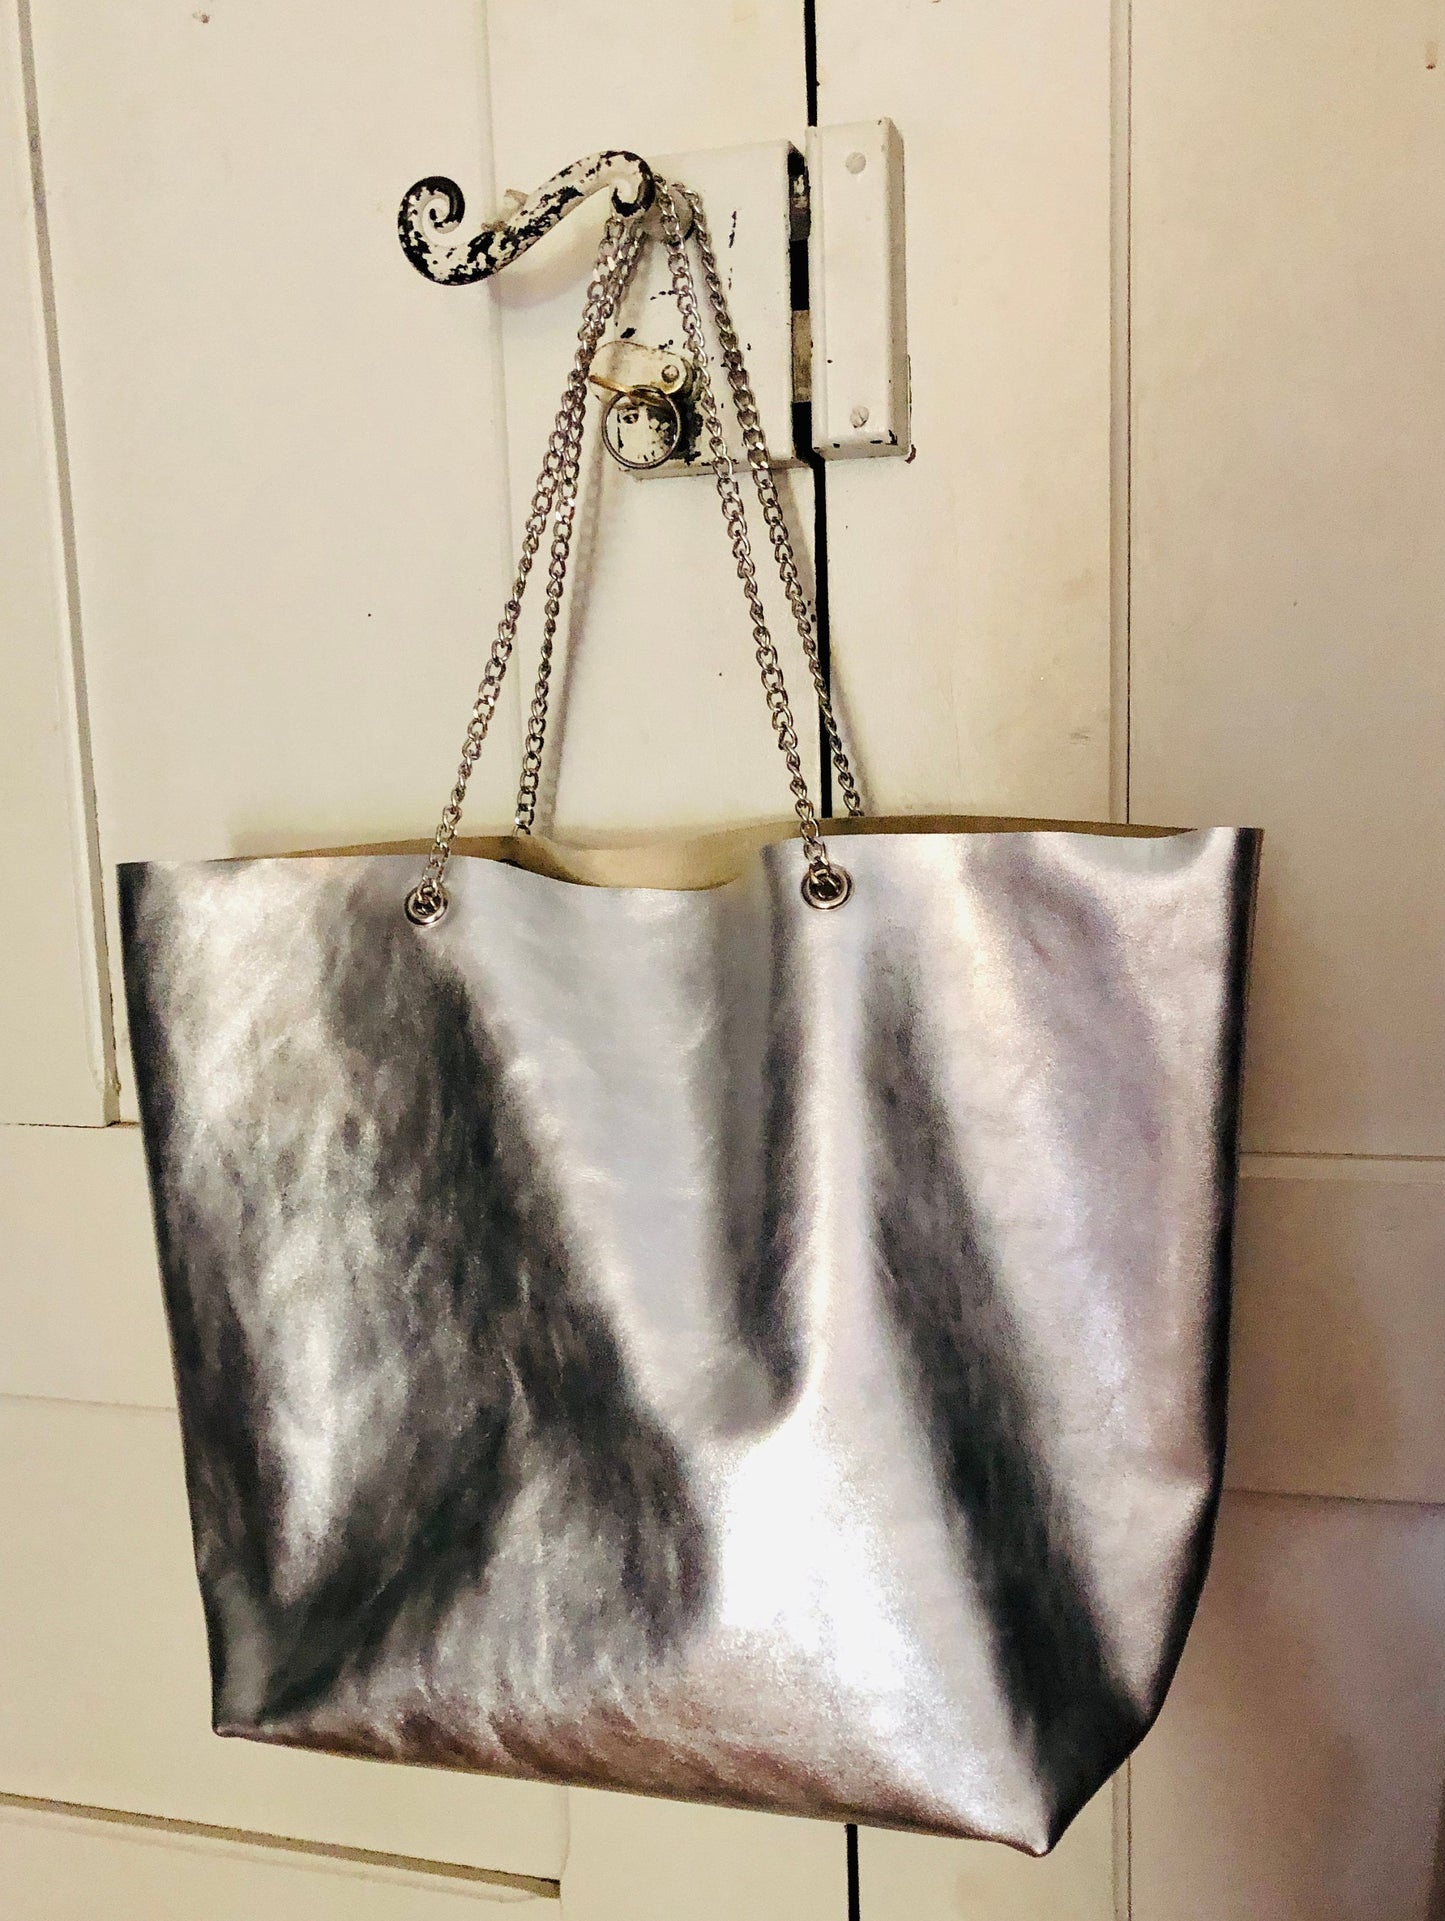 Soft silver leather tote bag with chain shoulder handles, slouchy leather tote bag, Italian leather tote bag, rock chic tote